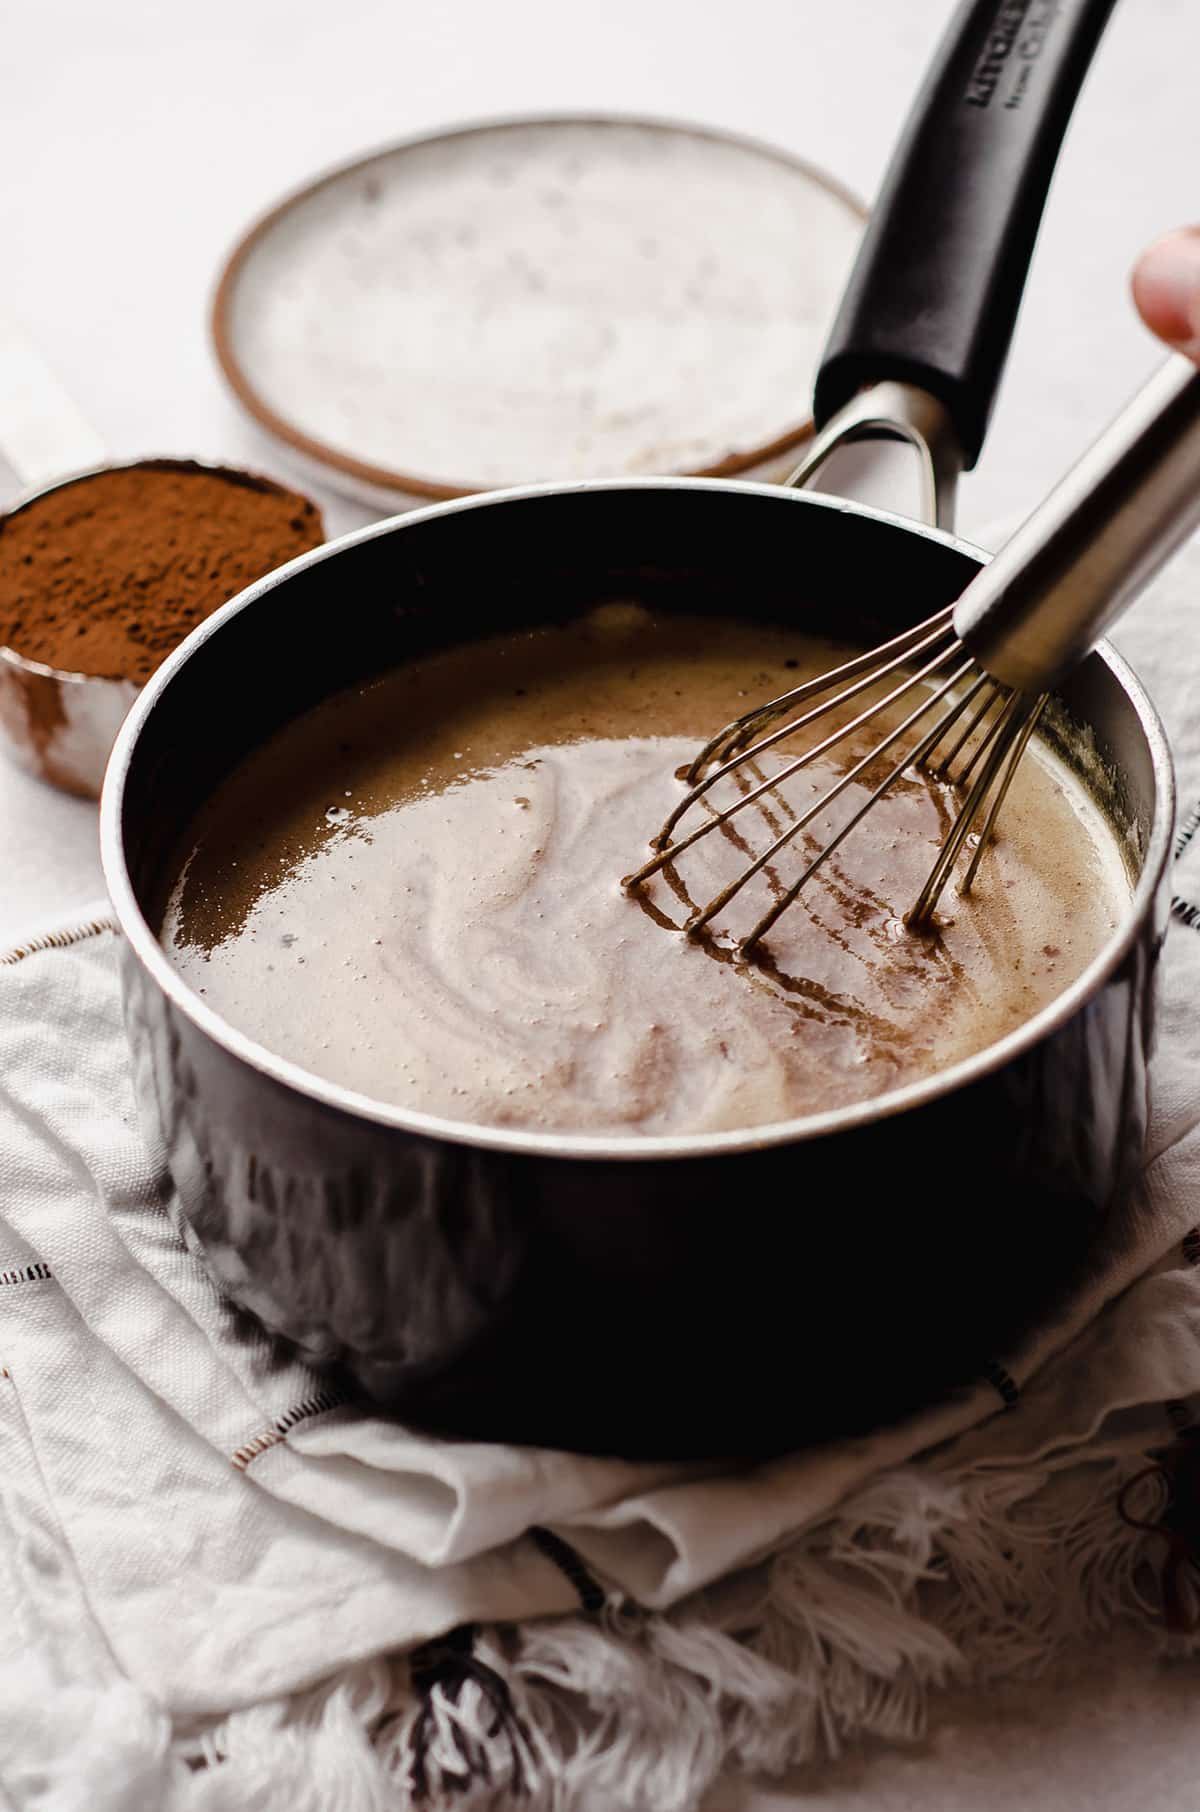 whisking ingredients together in a saucepan for homemade hot fudge sauce